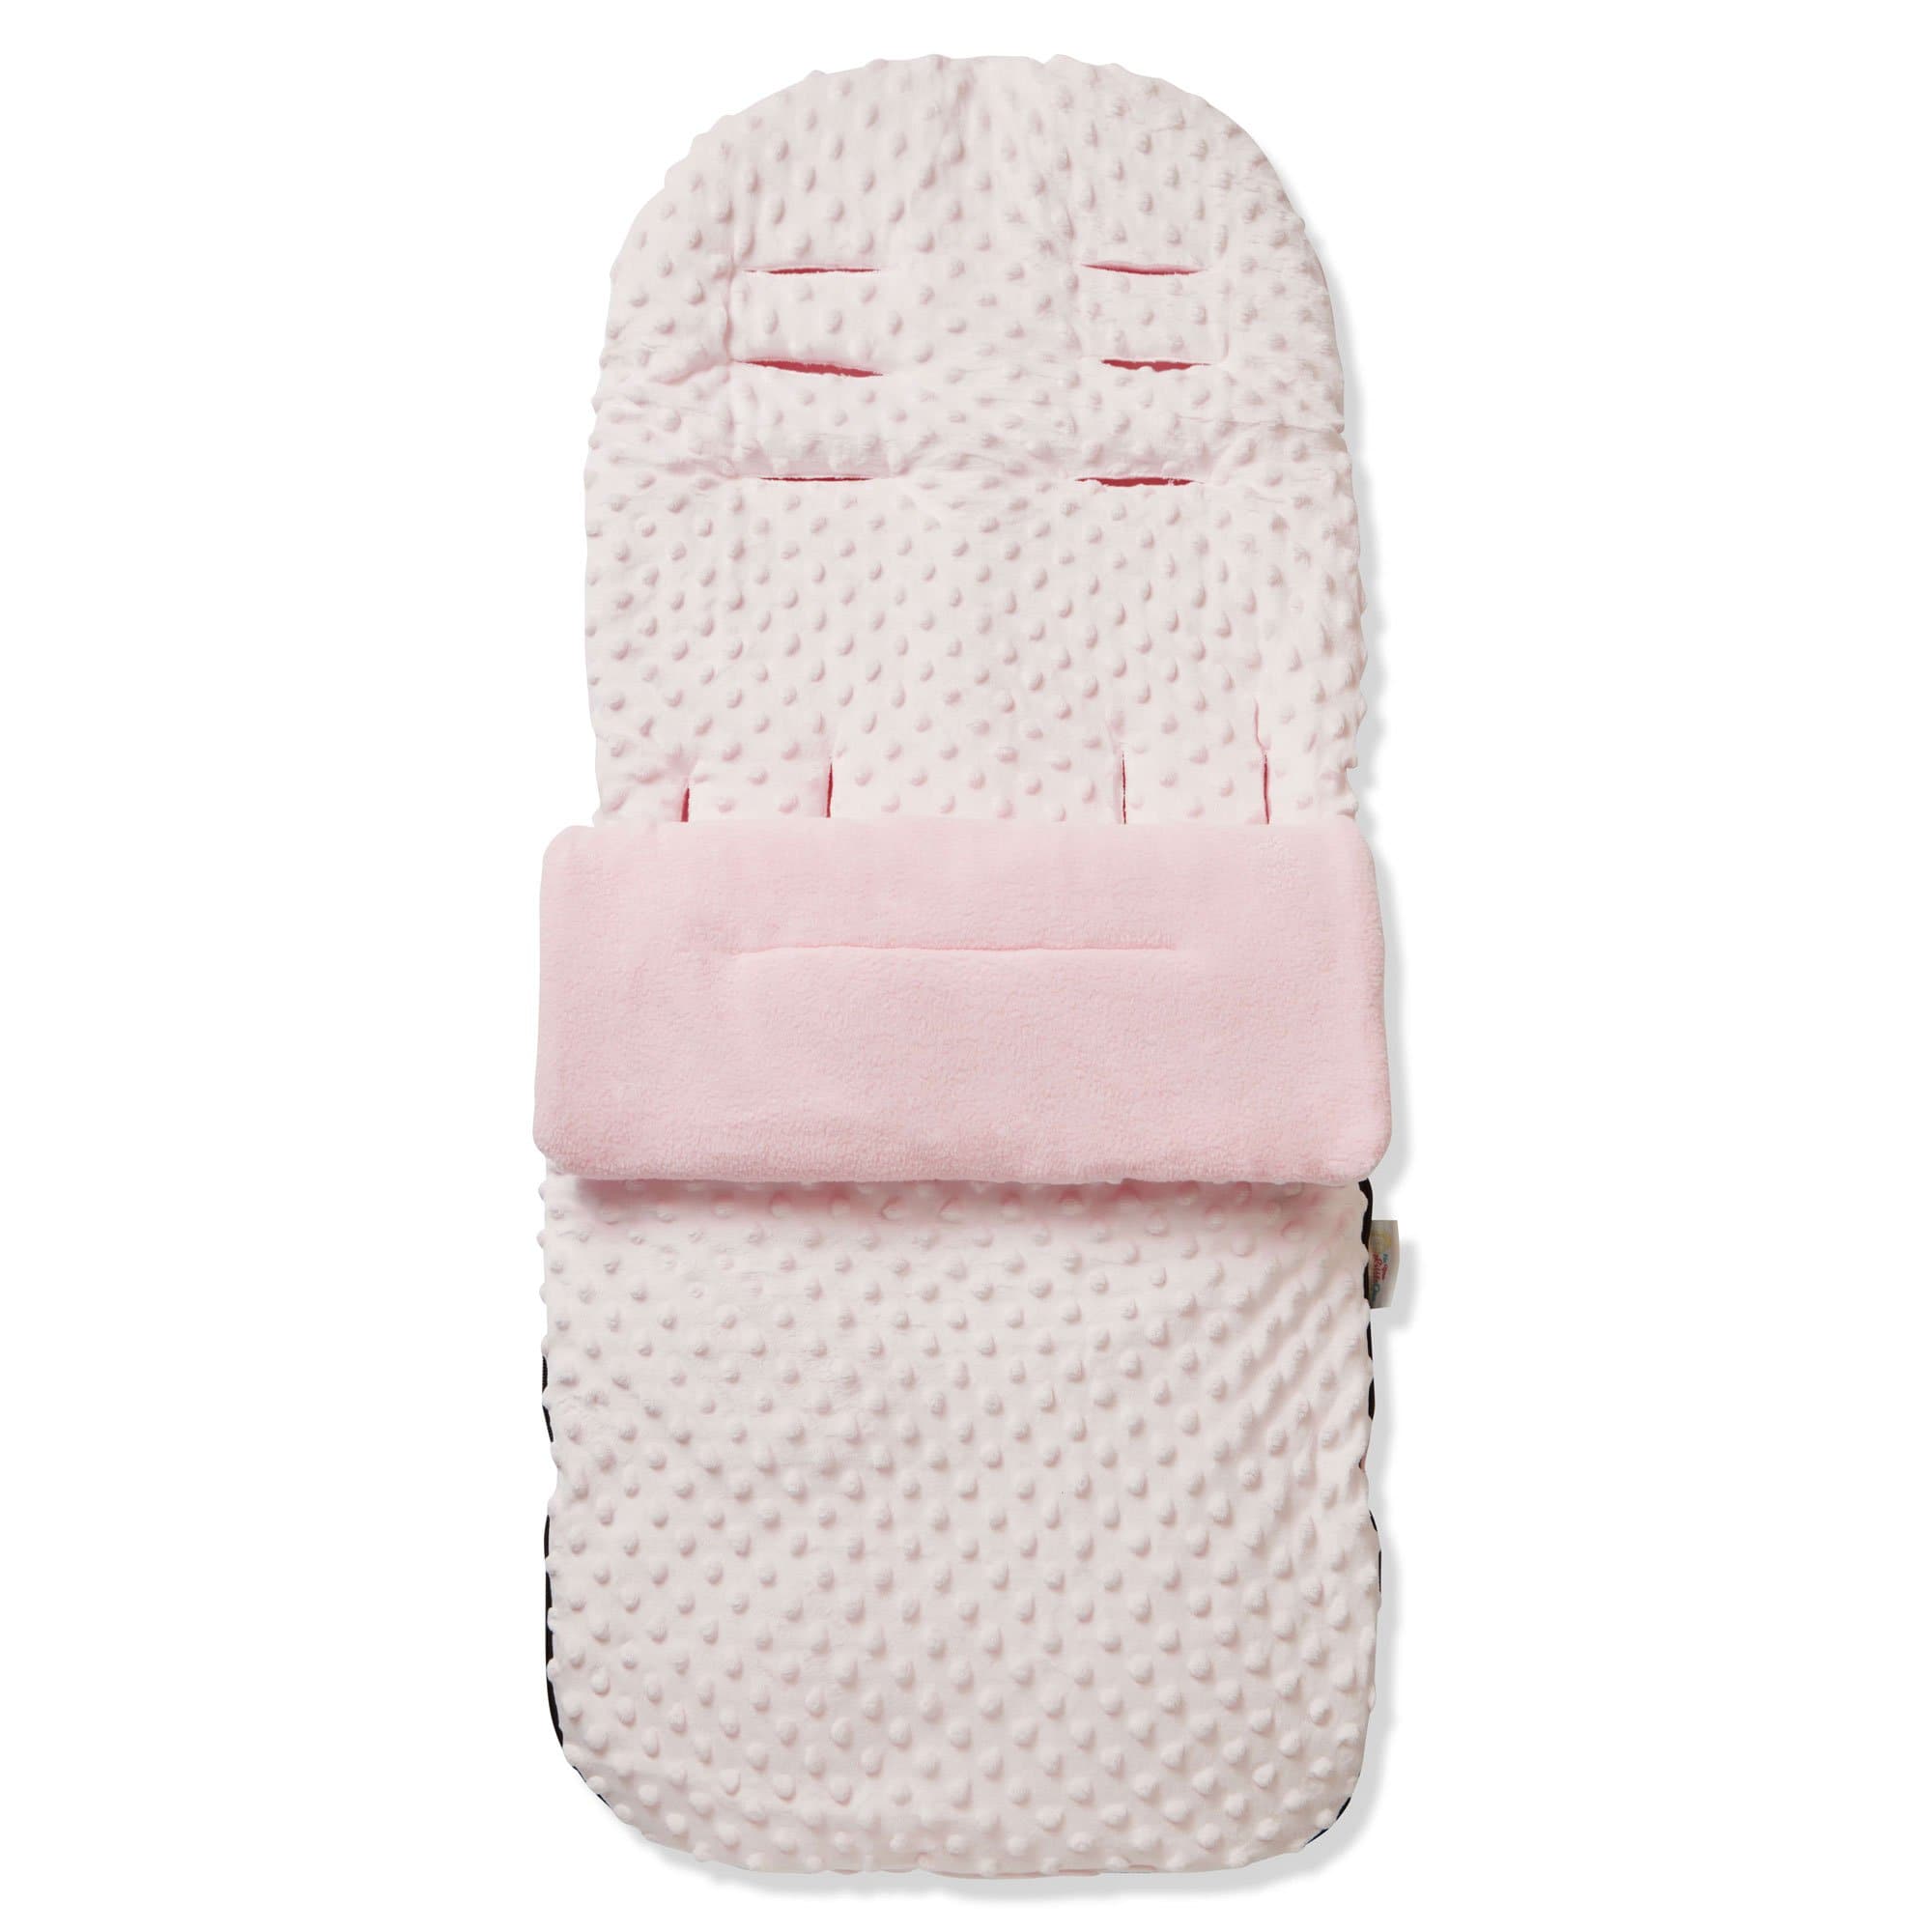 Dimple Footmuff / Cosy Toes Compatible with Uppababy - Pink / Fits All Models | For Your Little One